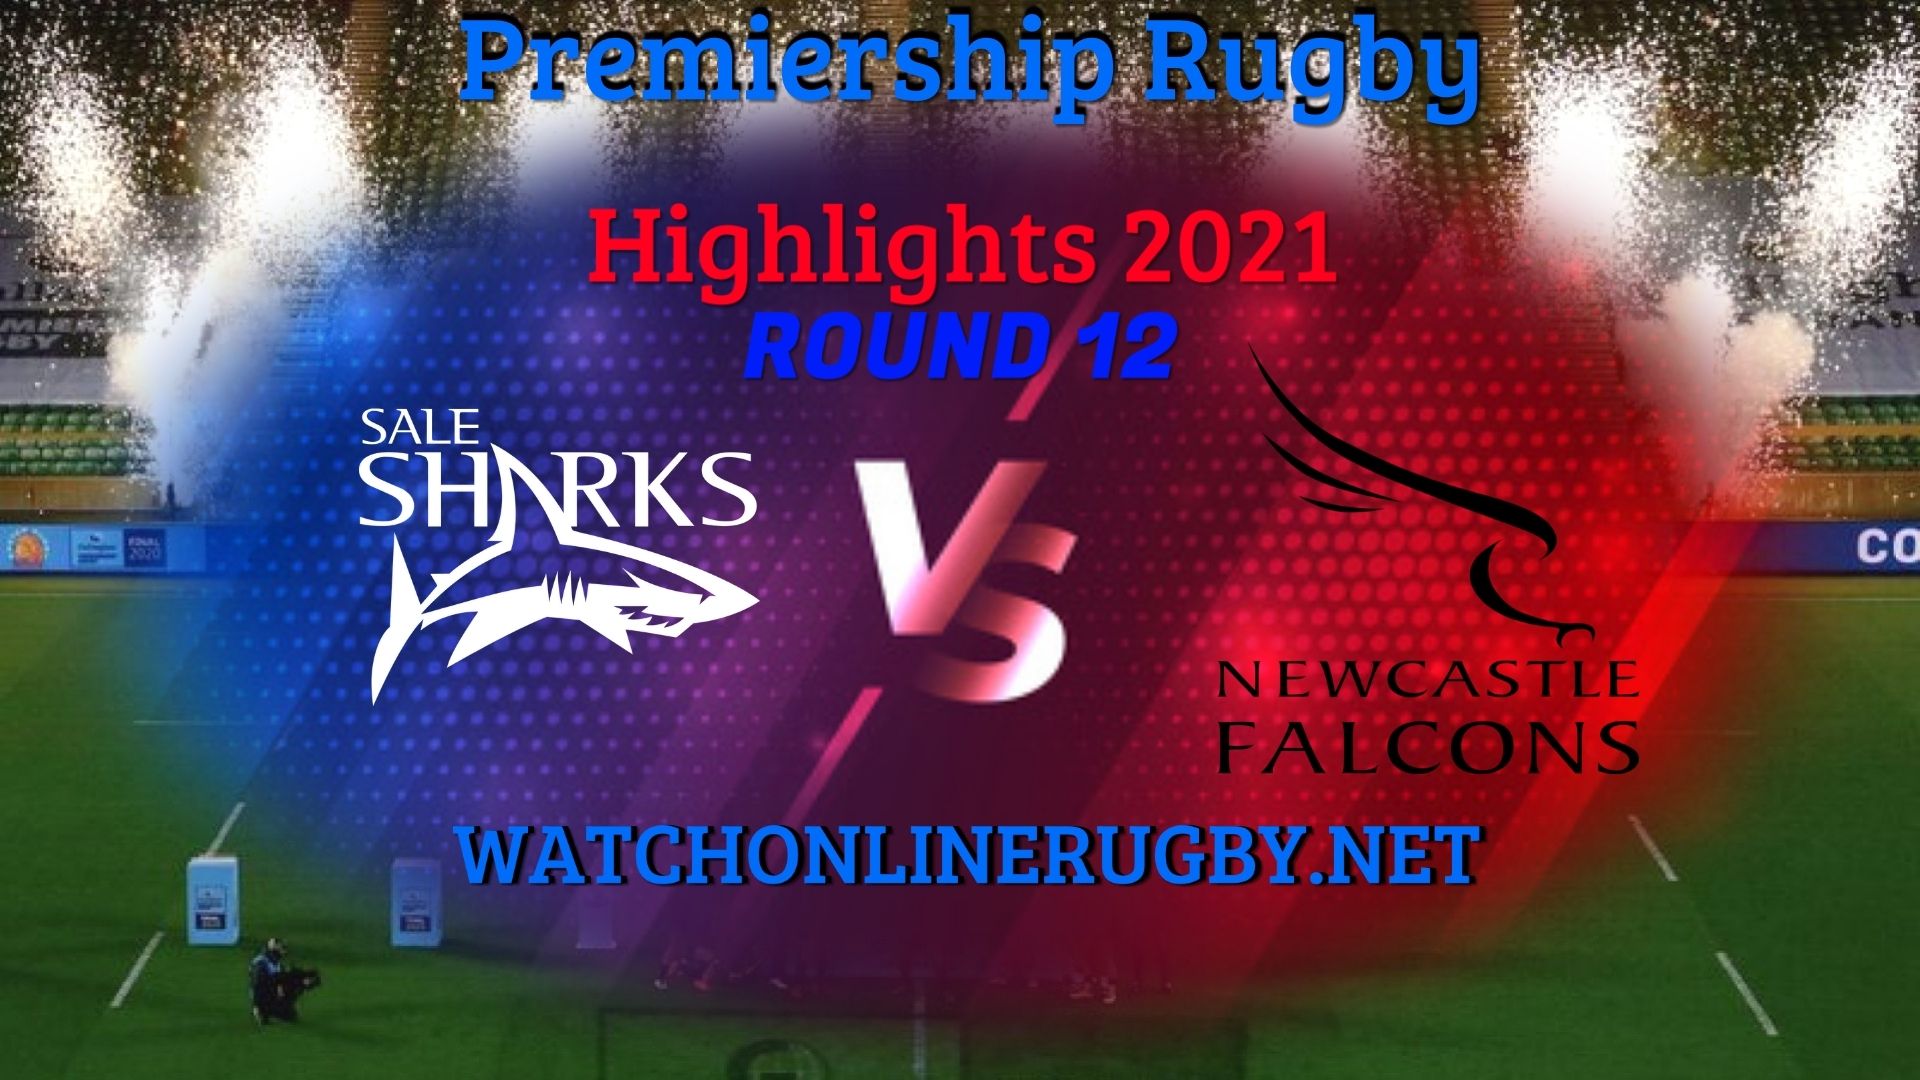 Sale Sharks Vs Newcastle Falcons Premiership Rugby 2021 RD 12